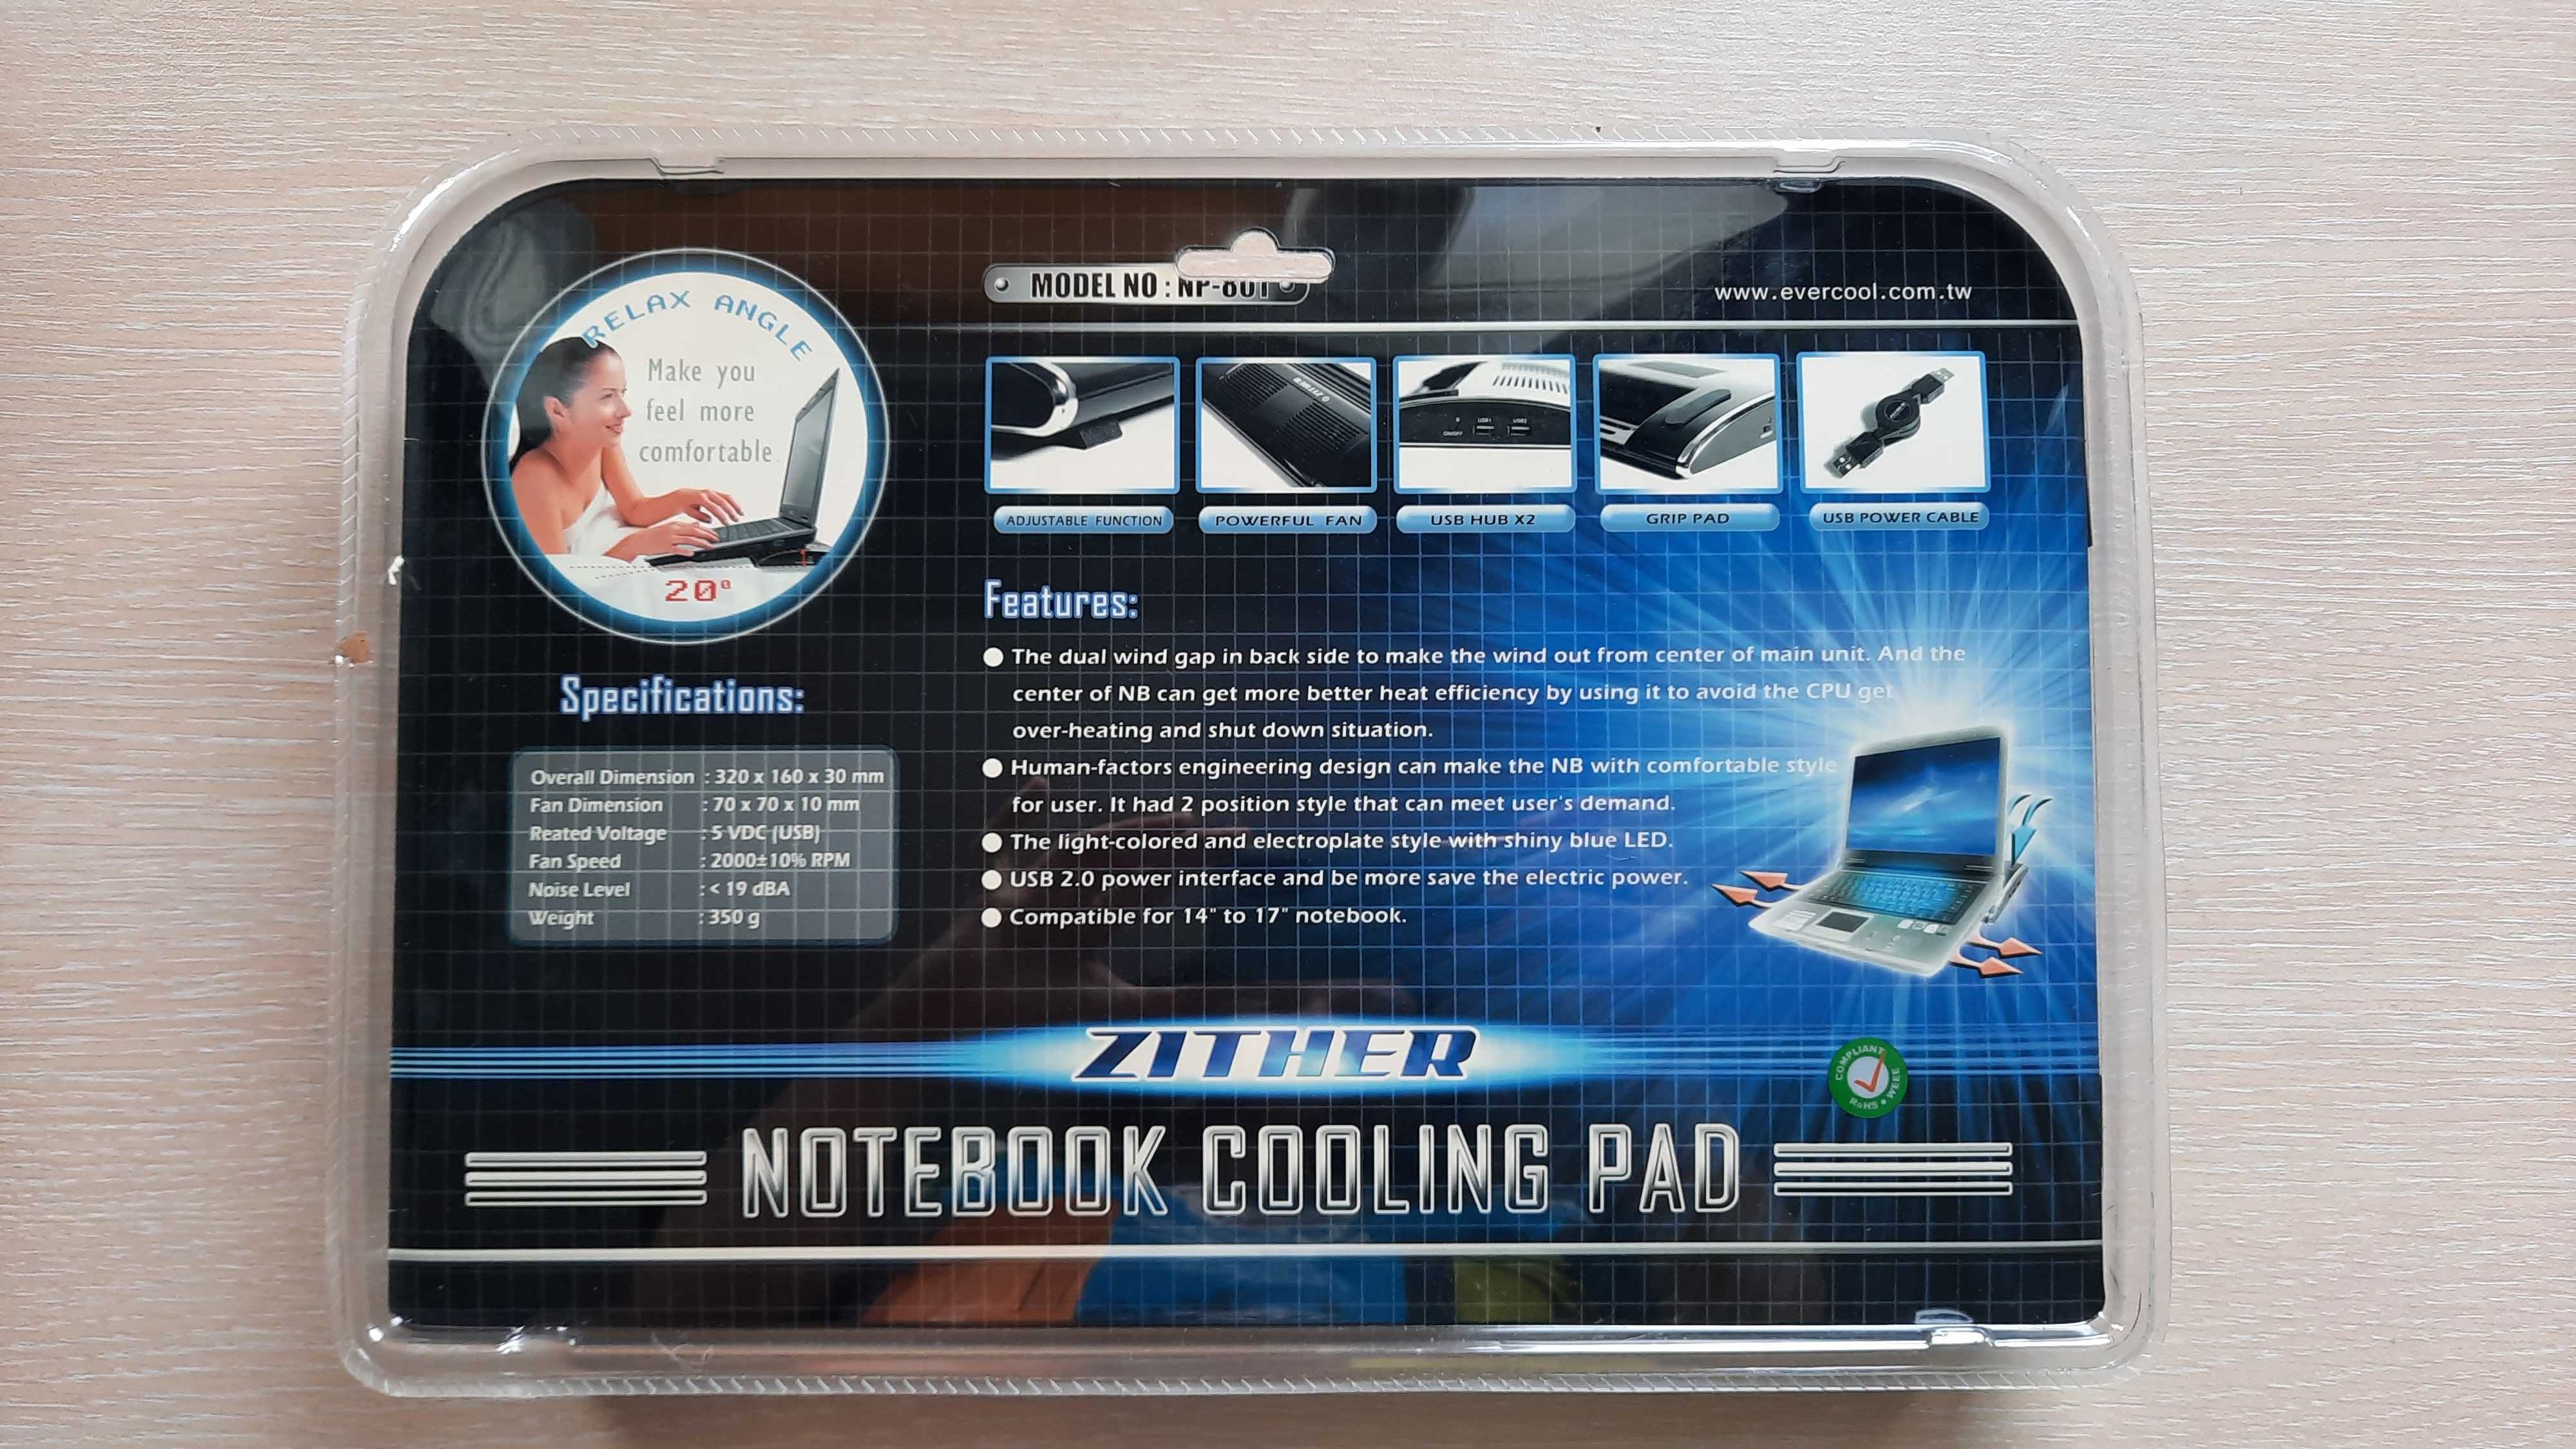 EVERCOOL Zither Notebook cooling pad